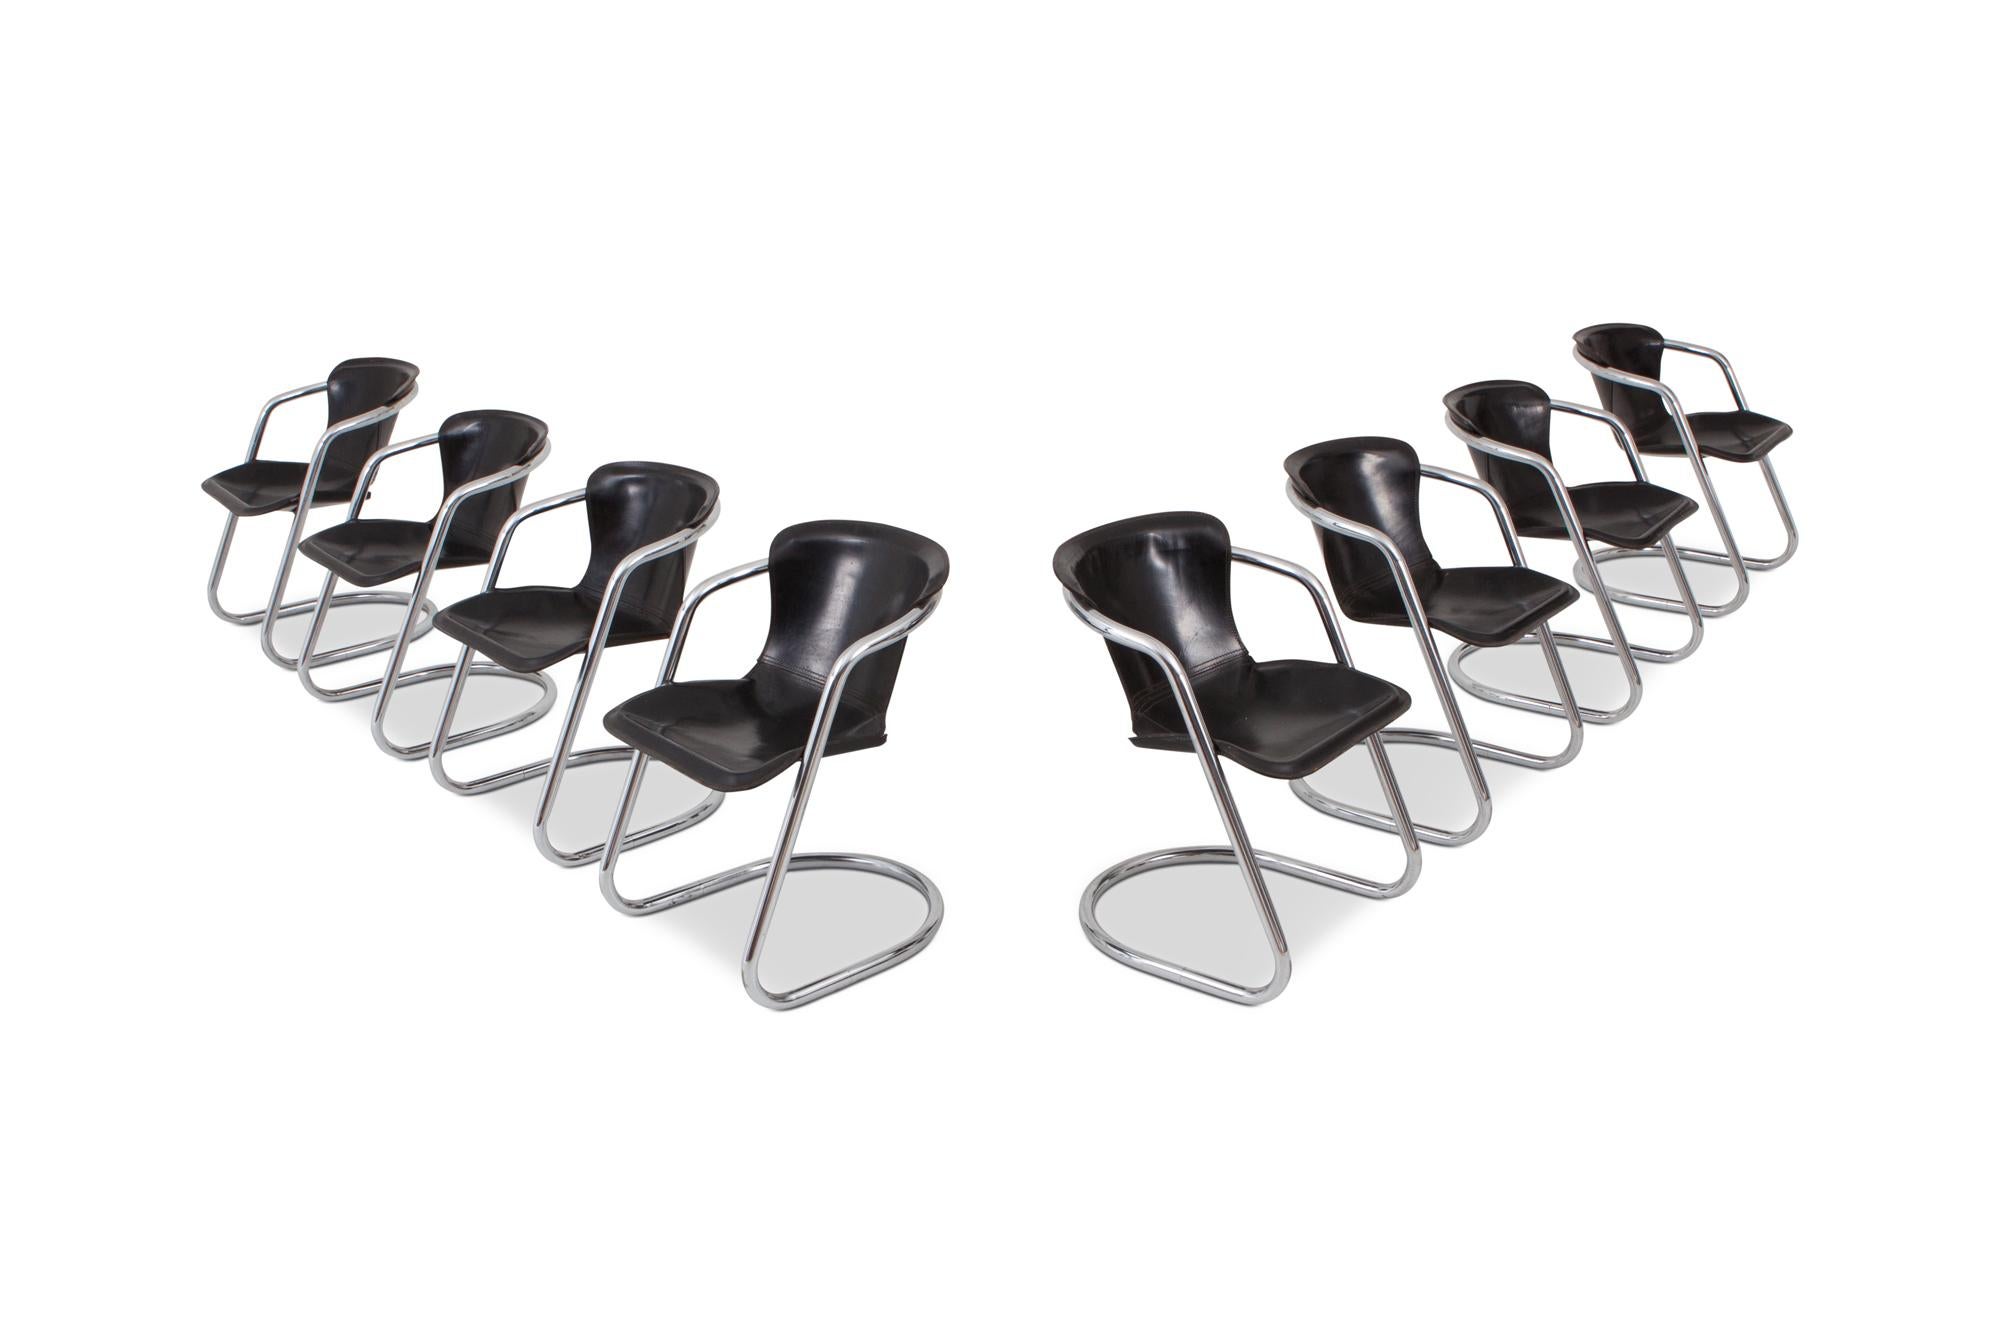 Mid-century modern tubular chrome dining chairs by Willy Rizzo, produced by Cidue, Italy, 1970s.

The chrome tubular frame holds thick black saddle leather seats which are in great condition and starting to show a lovely patina which will age even